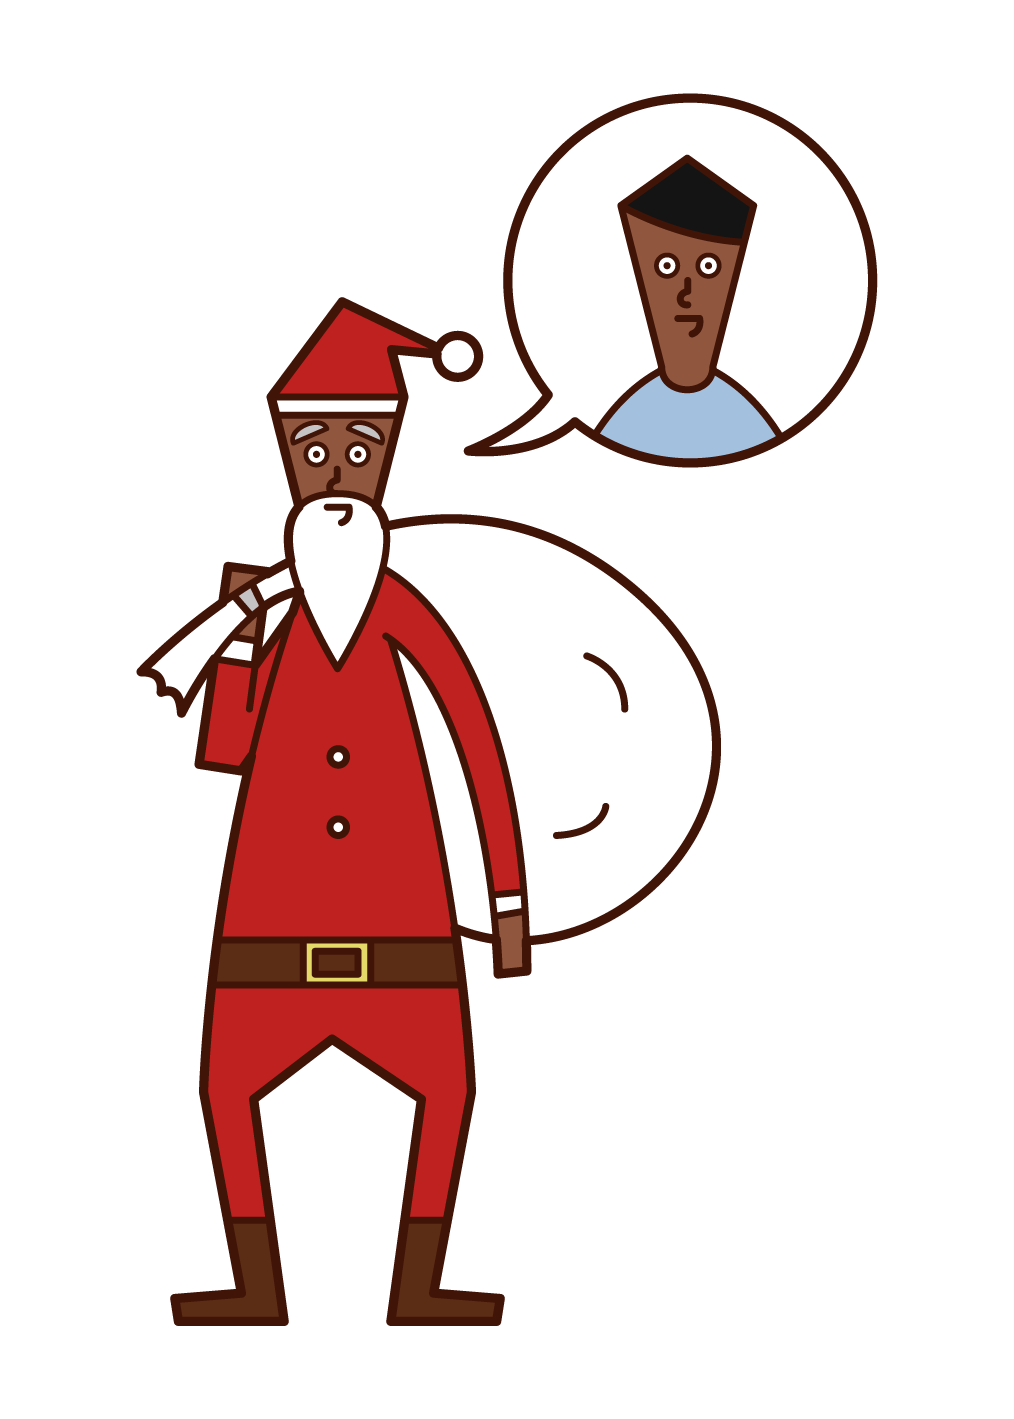 Illustration of Santa Claus (man) disguised by his father